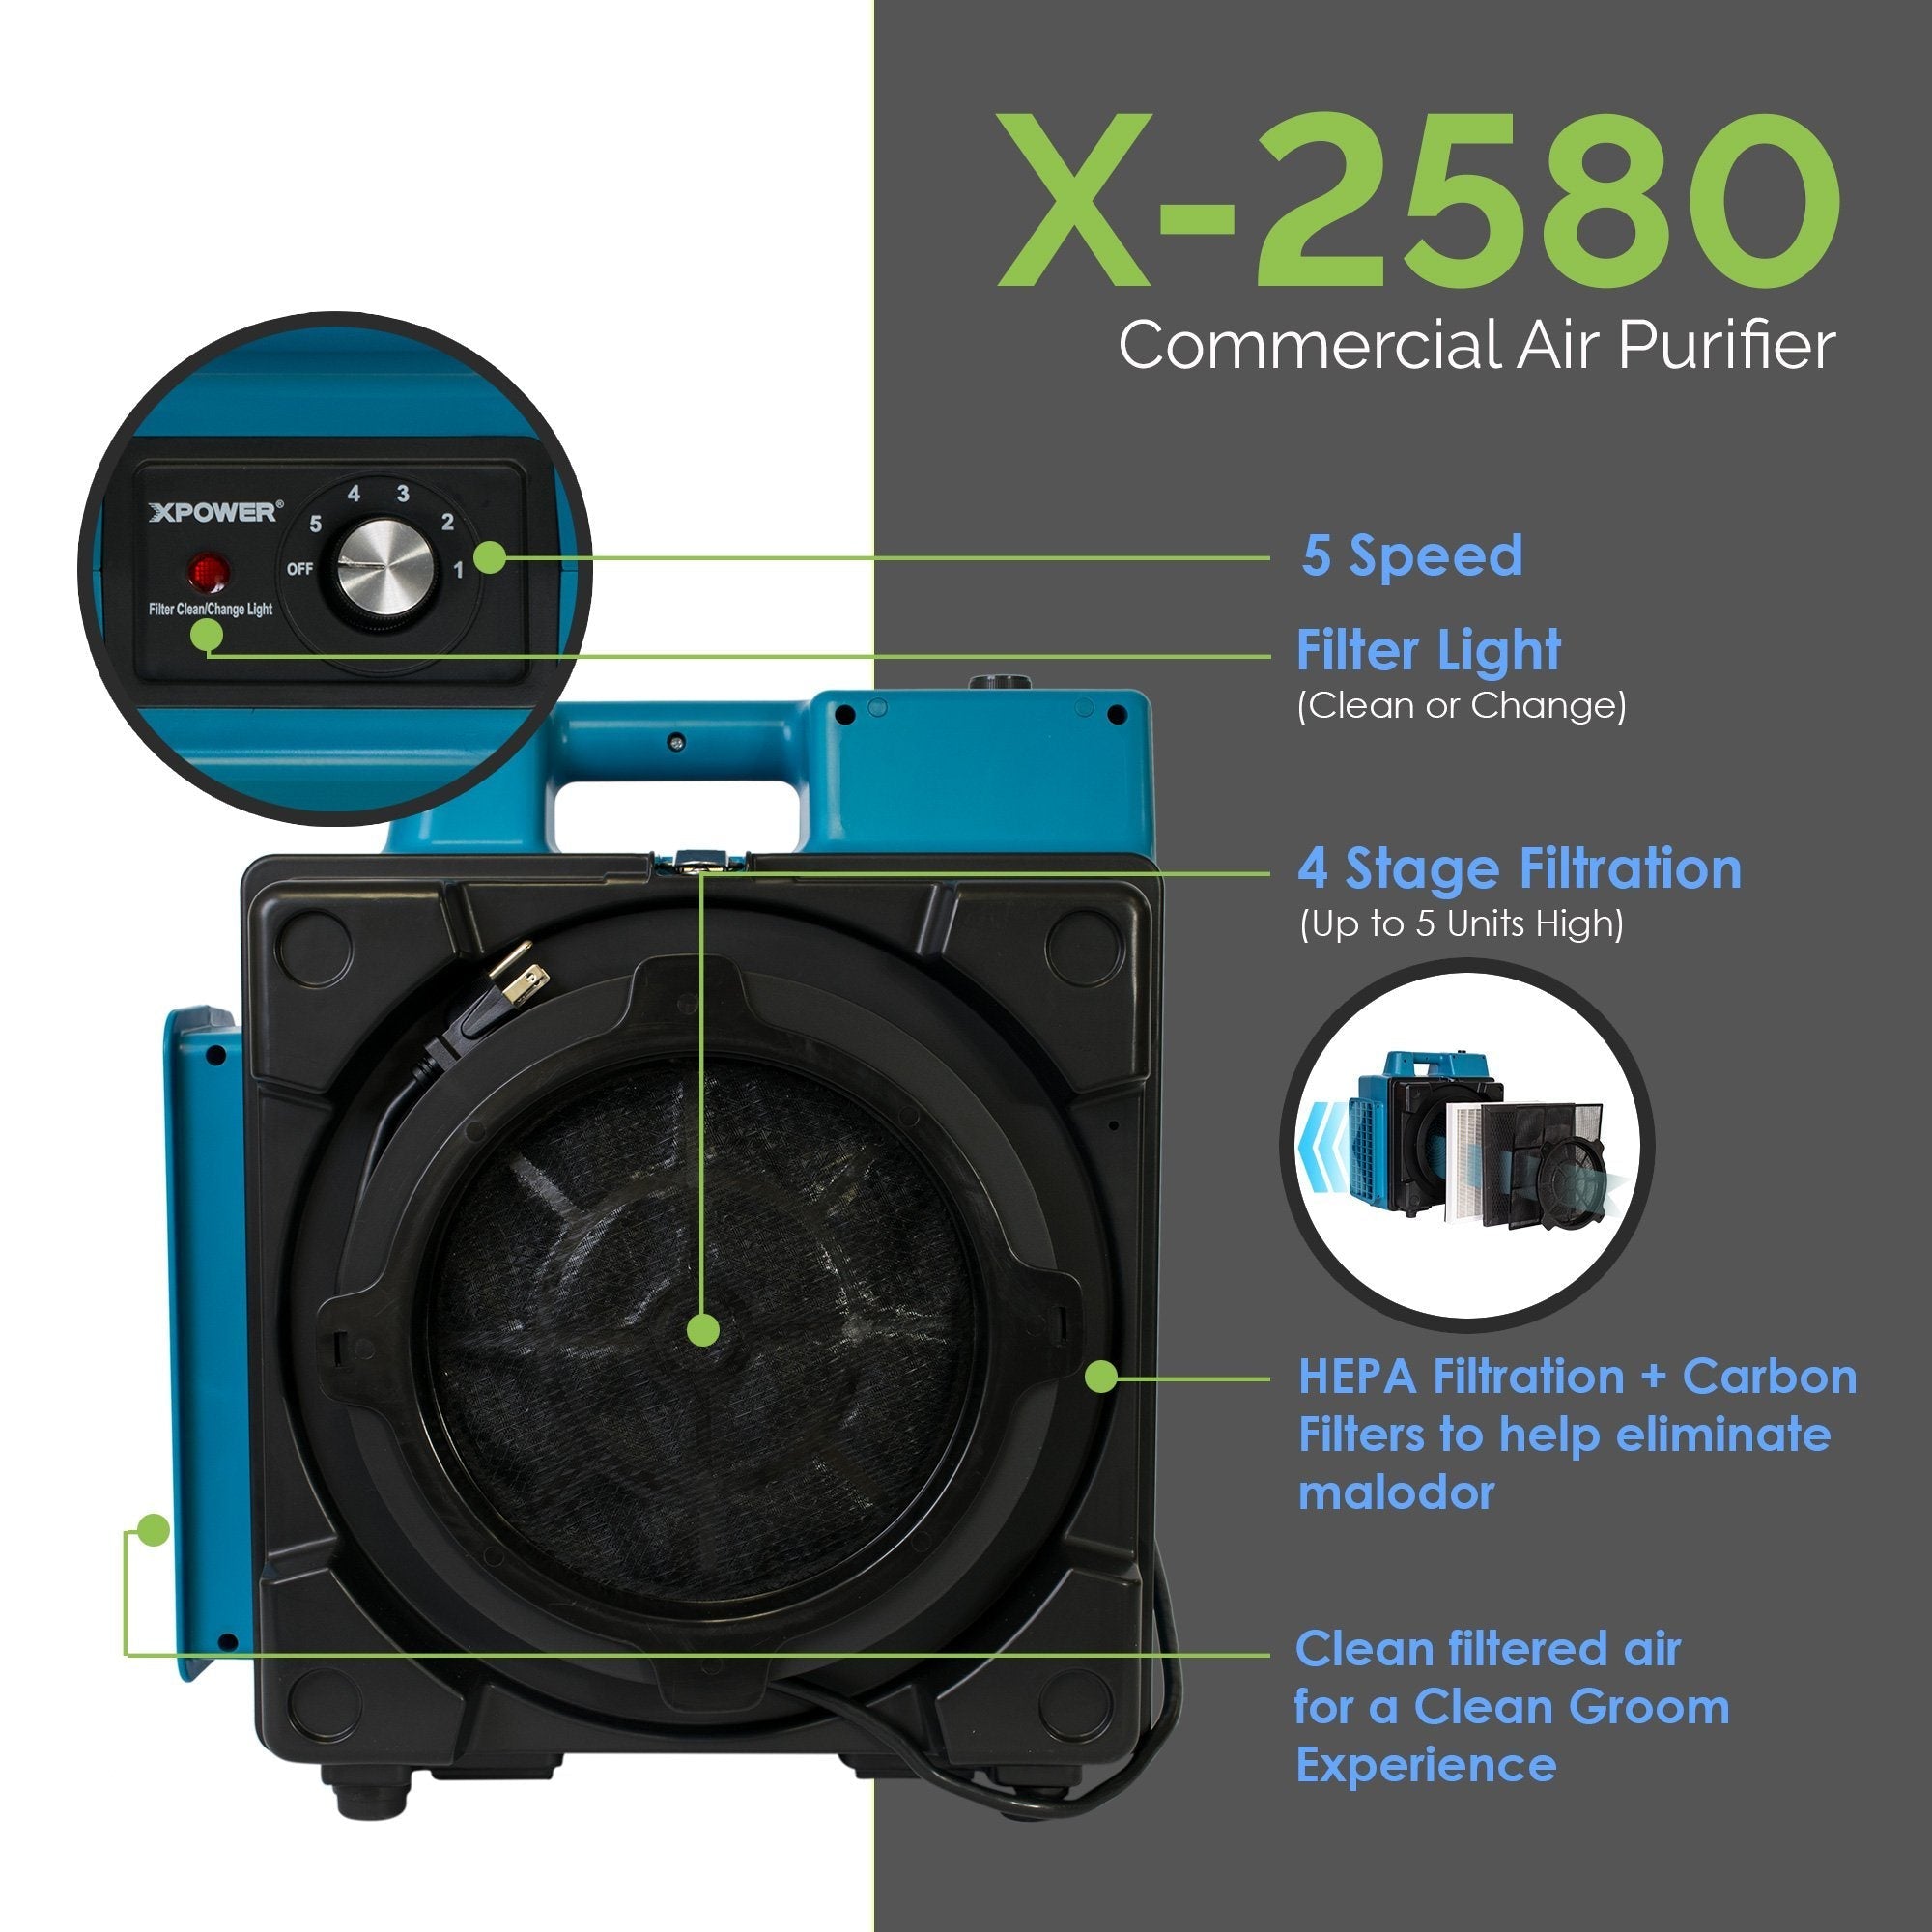 XPOWER CleanGroom Carbon-Free Solution